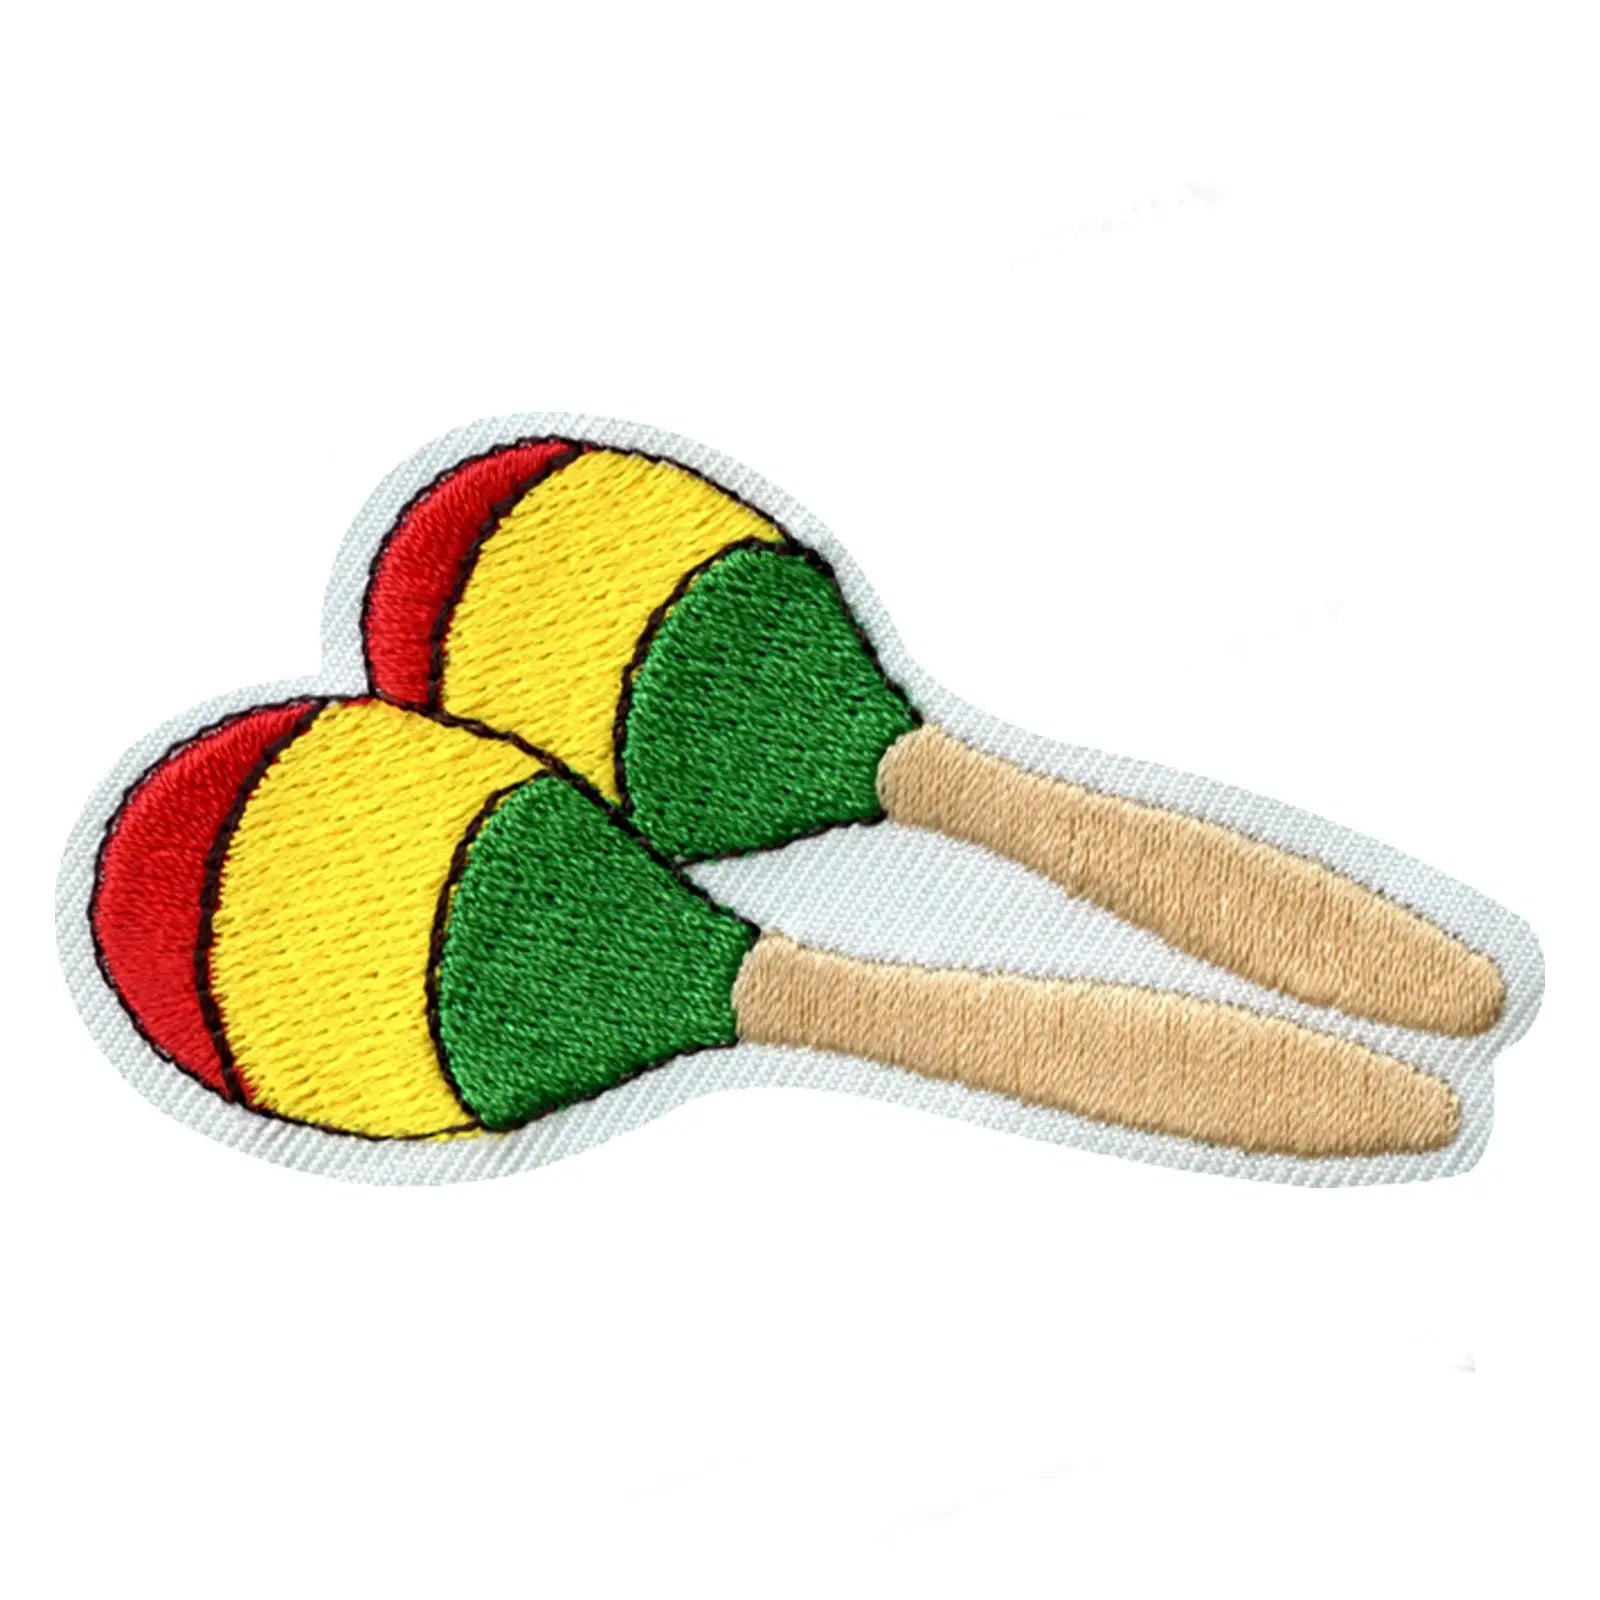 Colorful Latin Maracas Instrument Embroidered Iron On Patch 